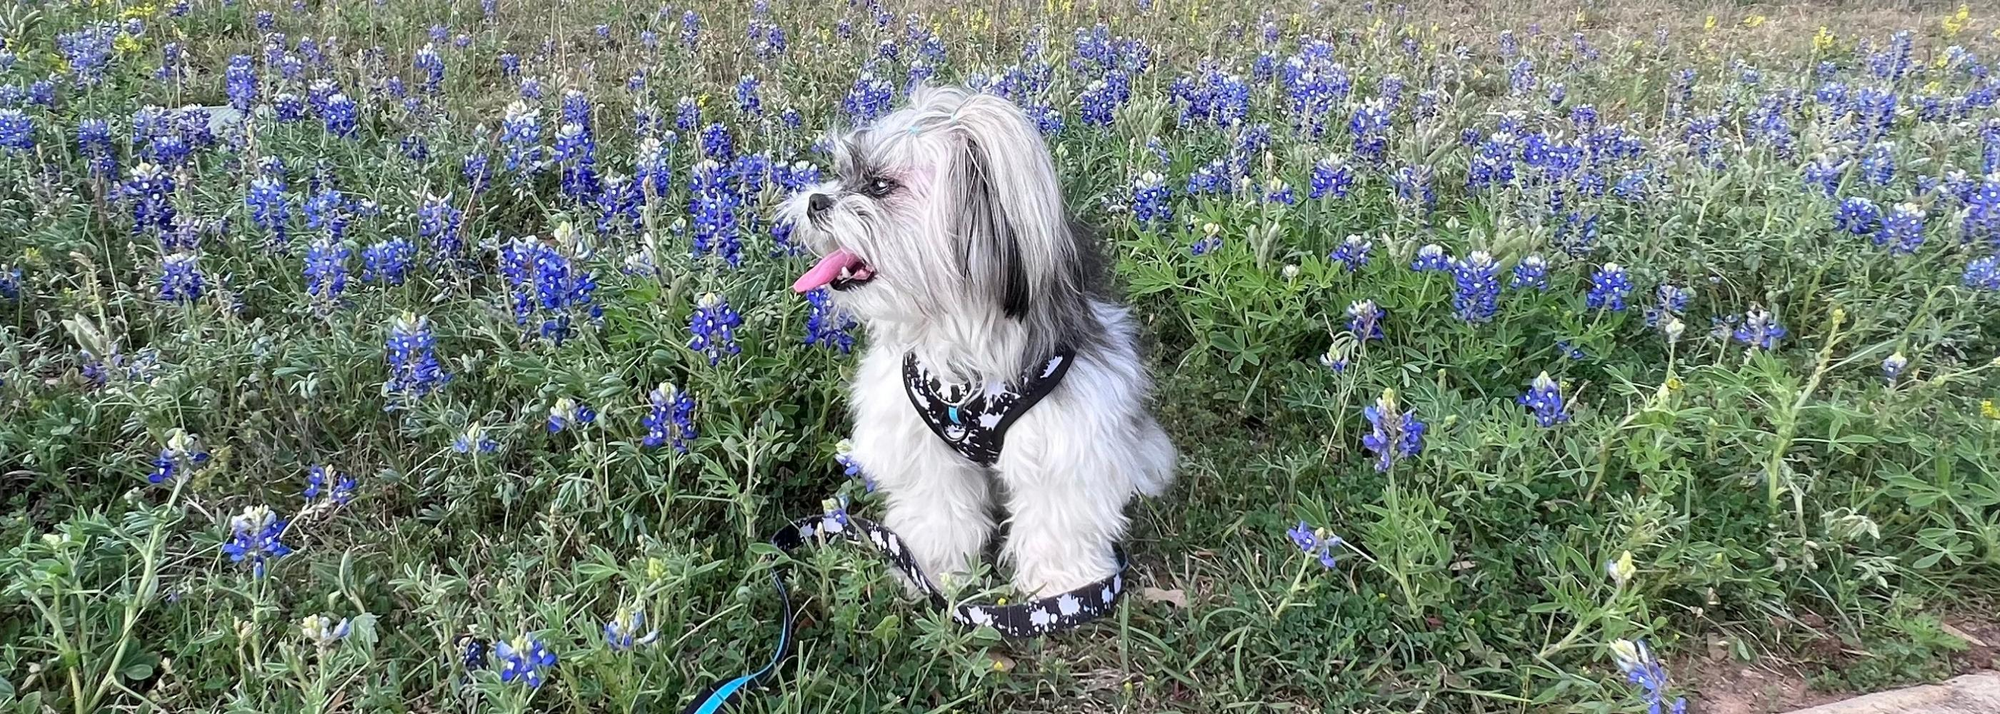 Teal Dog Harness - Splatter Swagger - Shih Tzu dog wearing black and white splatter adjustable dog harness vest with teal accents sitting outdoors in a field of Blue Bonnets - Wag Trendz